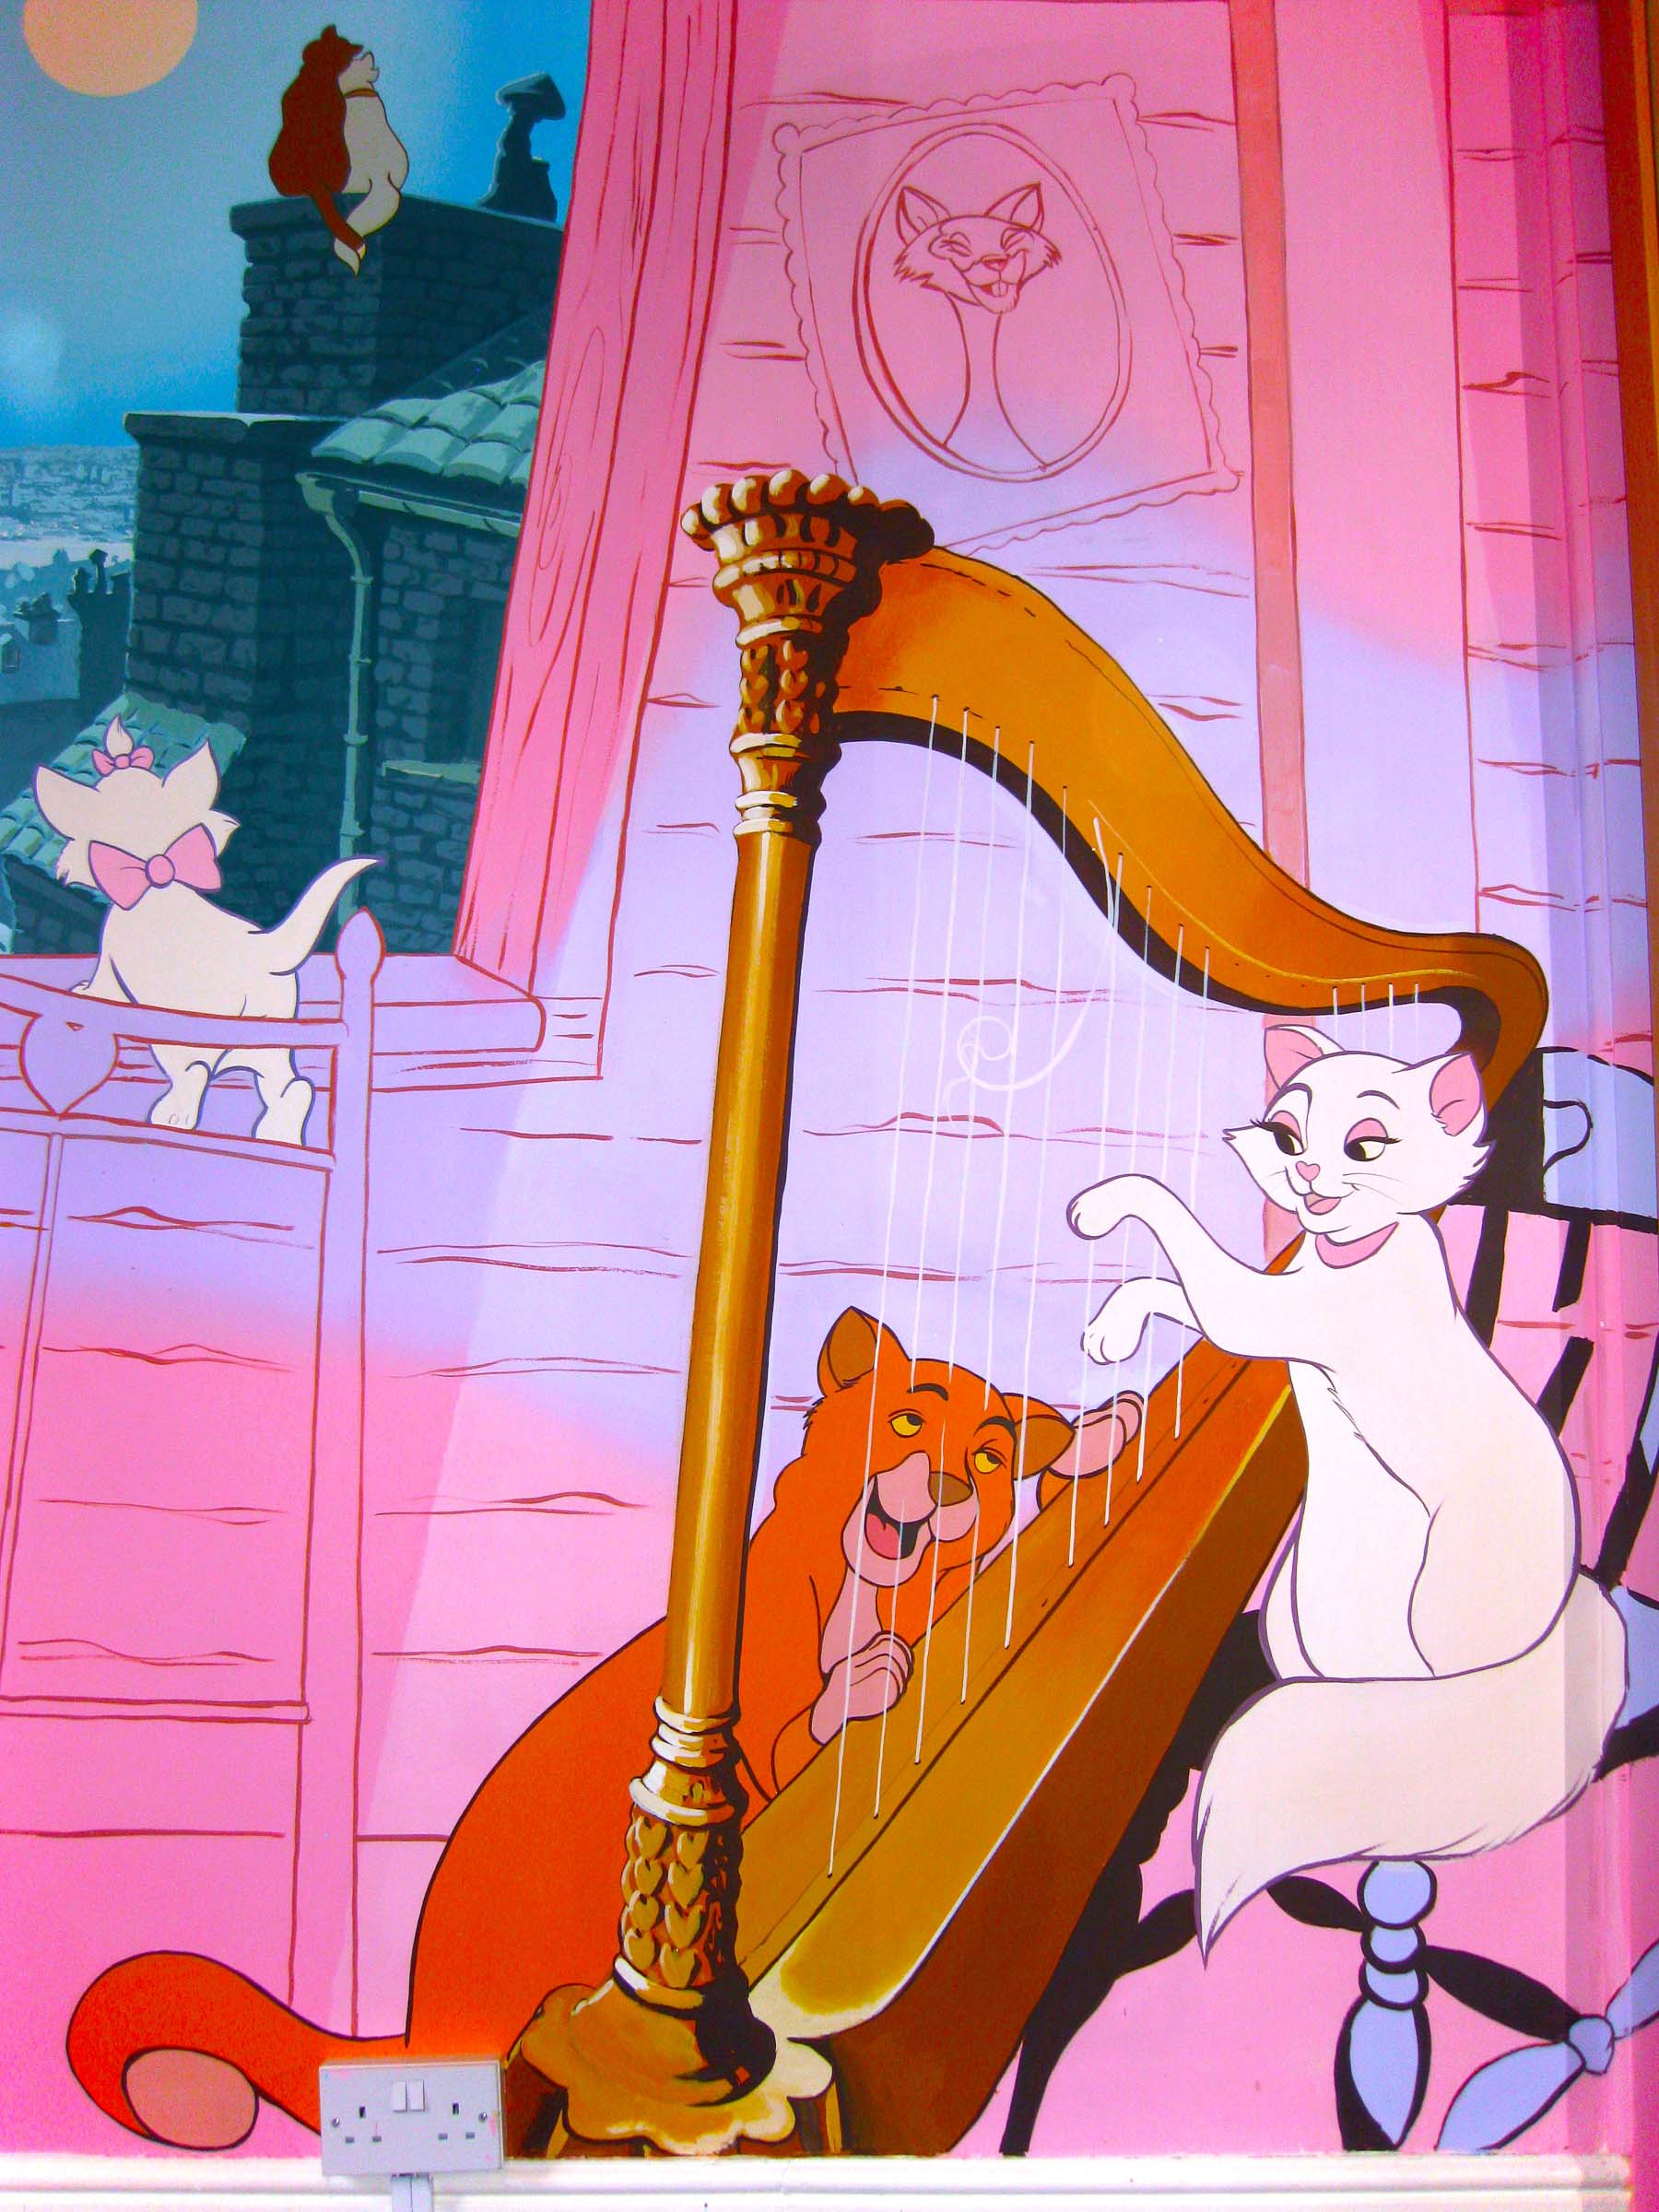 Duchess and O'Malley crooning through the harp strings in Aristocats mural